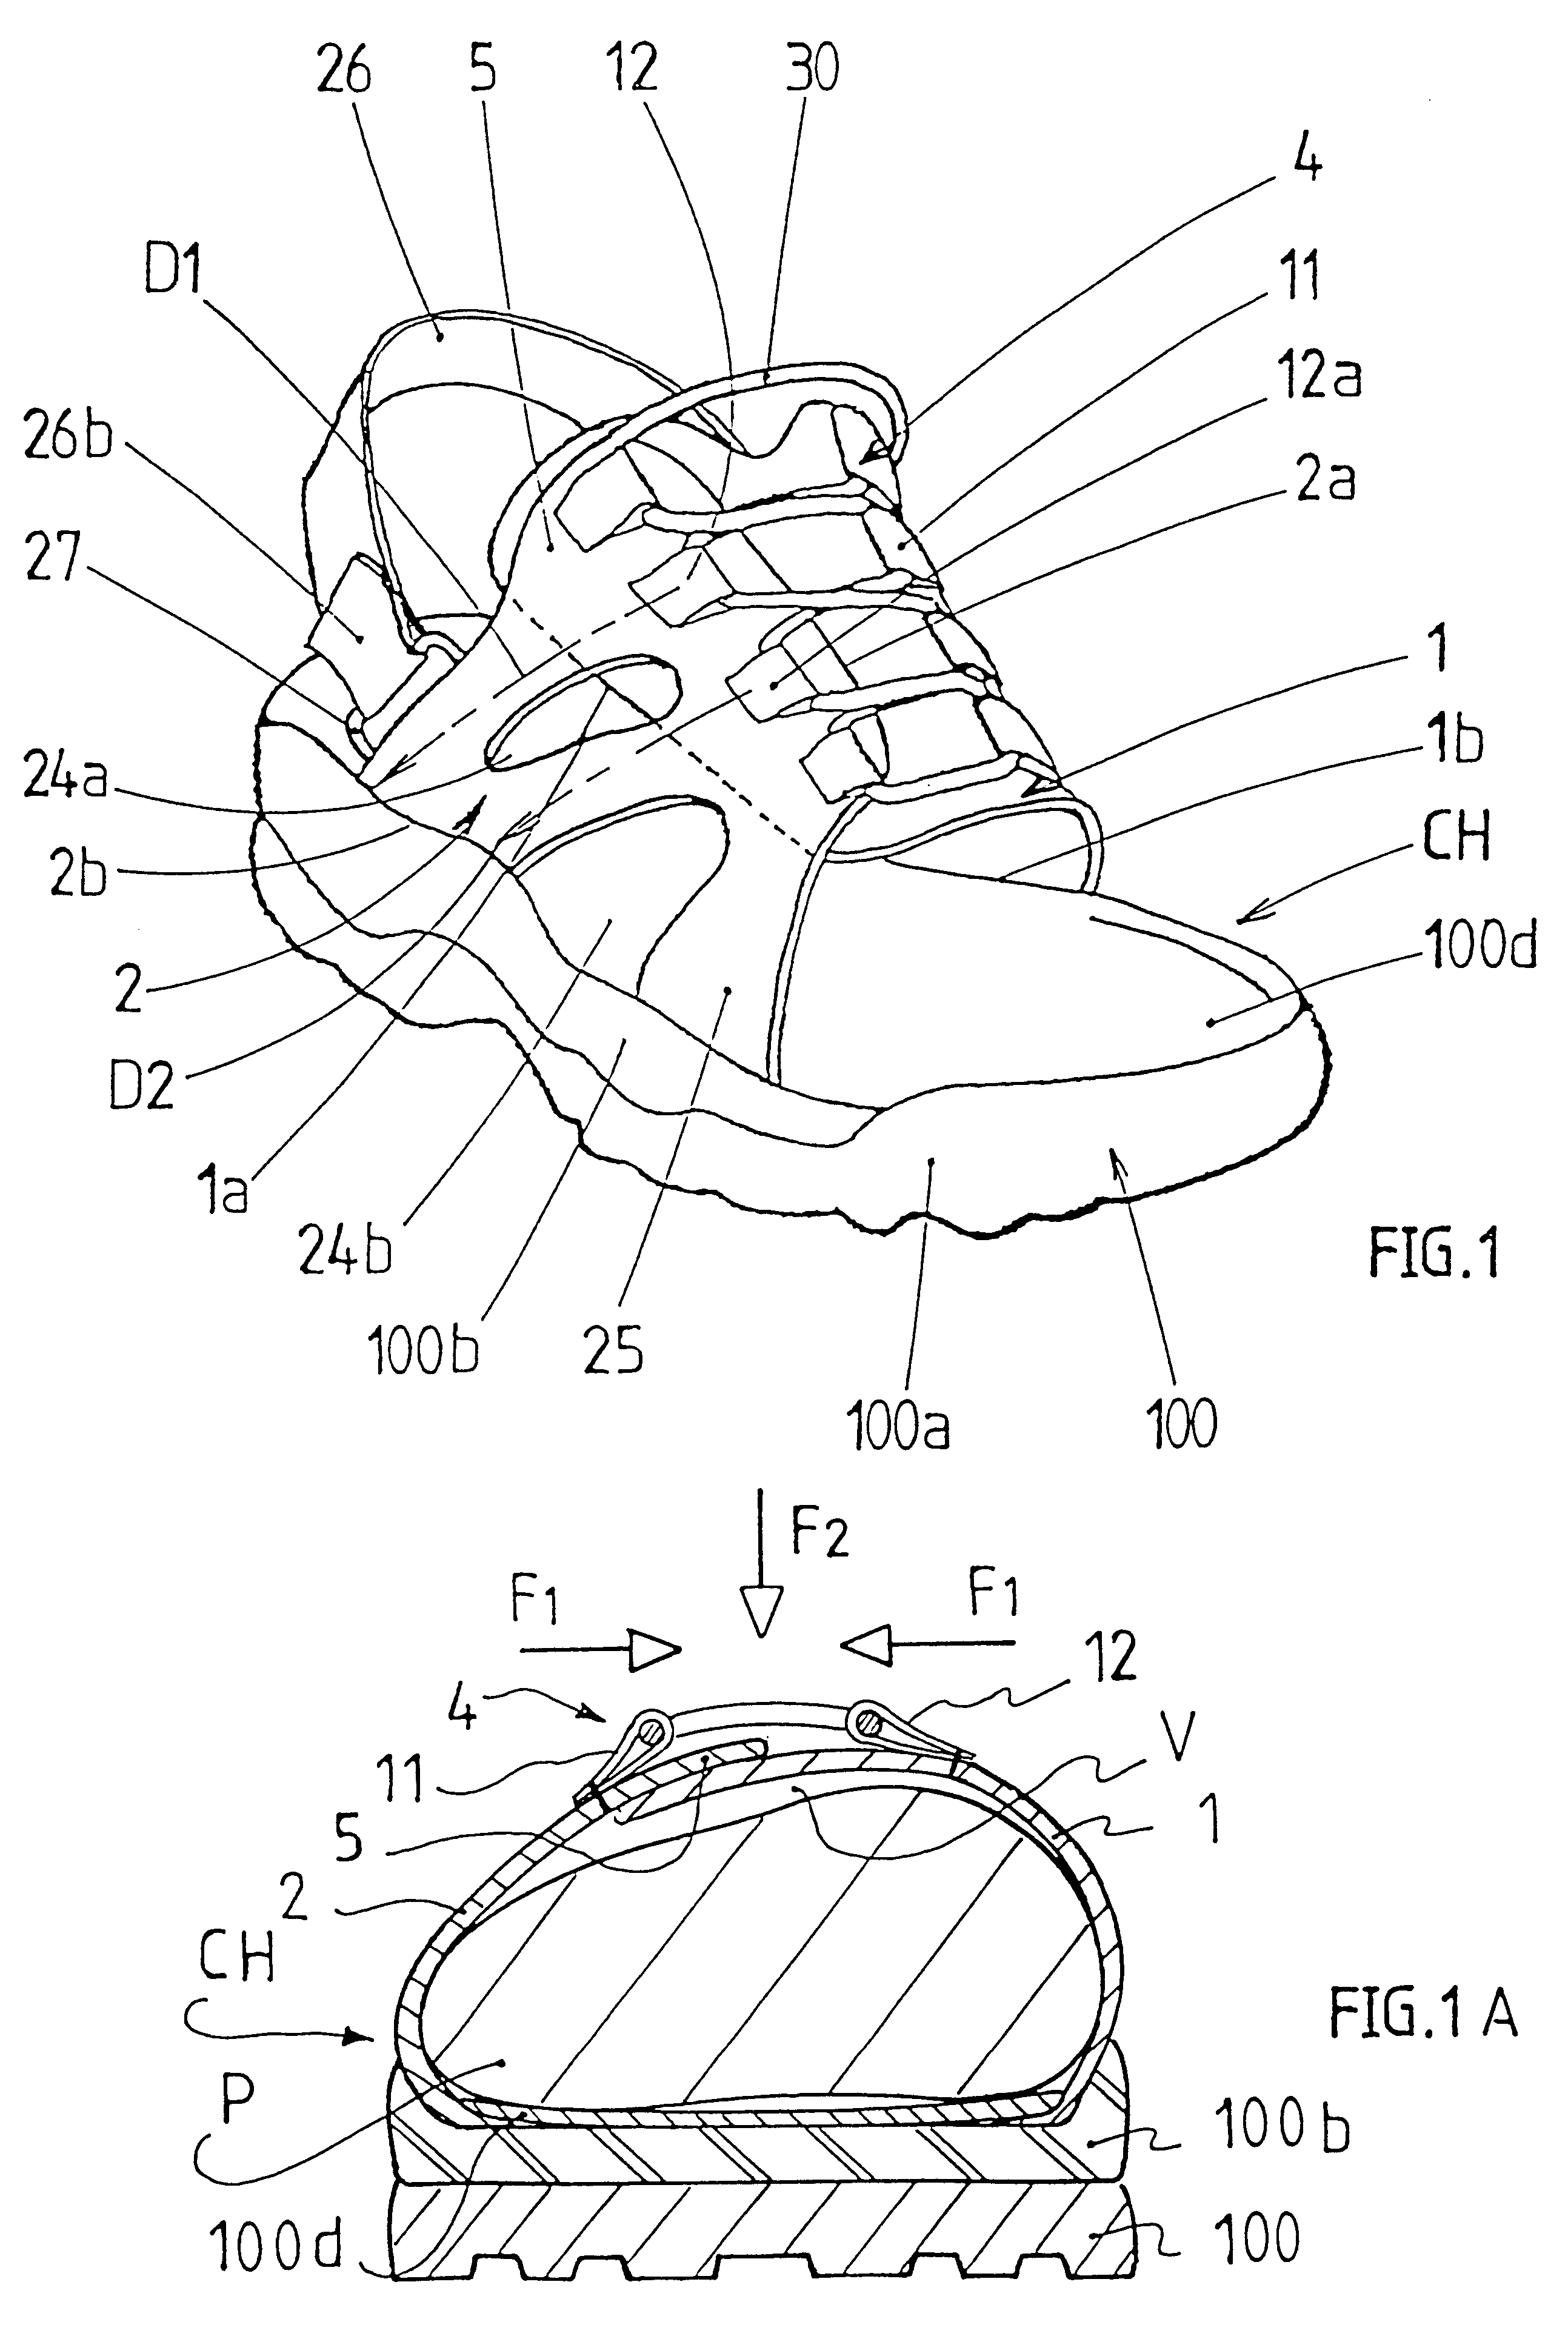 Tightening device for footwear, and an article of footwear incorporating such tightening device